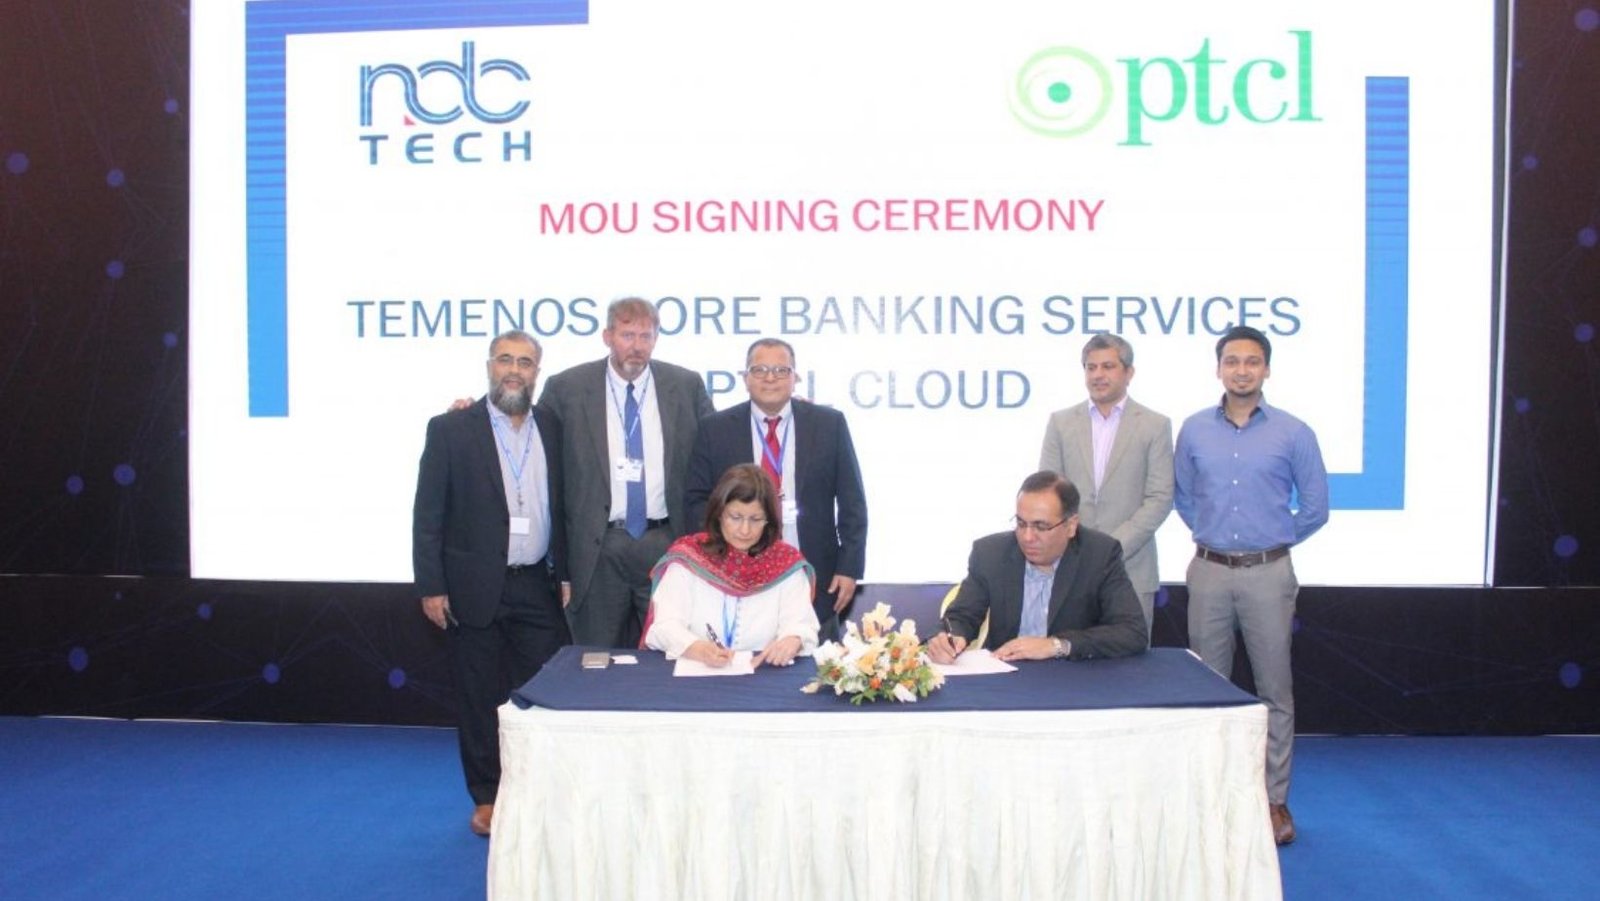 NdcTech joins hands with CaterpillHERs to empower Women in Pakistan